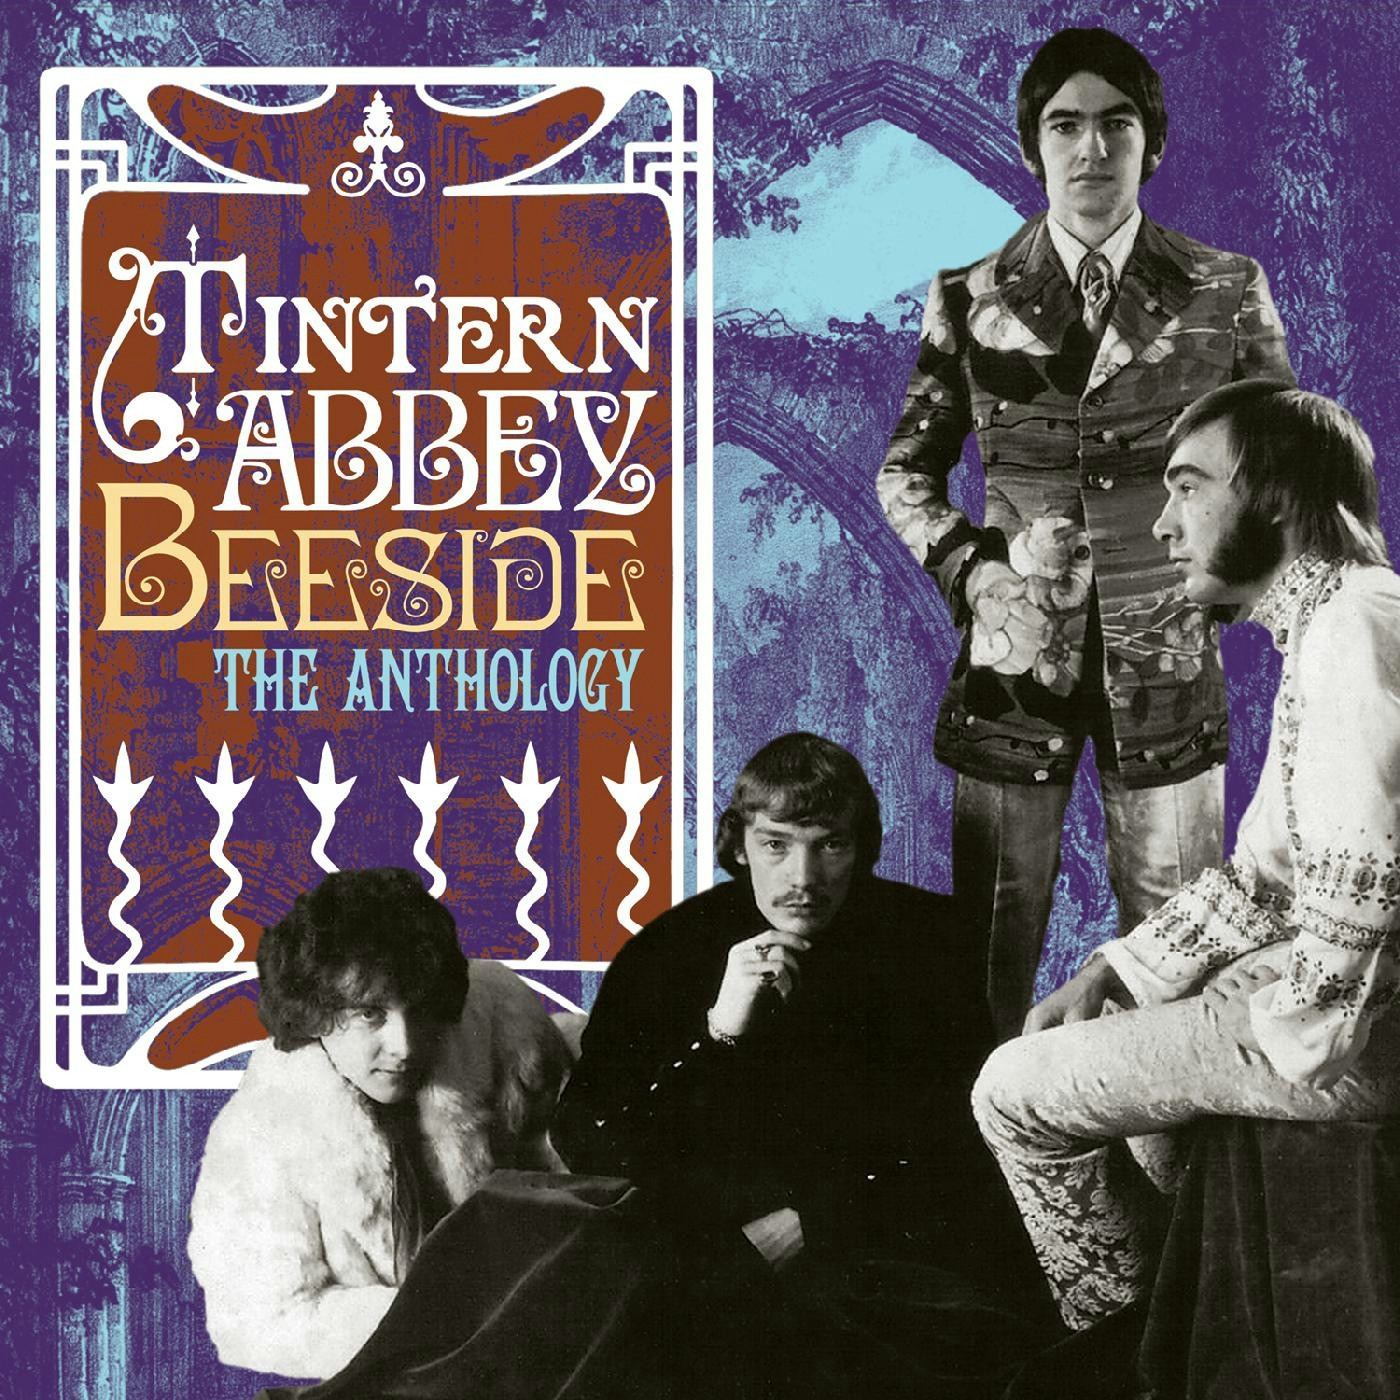 Album artwork for Album artwork for Beeside - The Anthology by Tintern Abbey by Beeside - The Anthology - Tintern Abbey